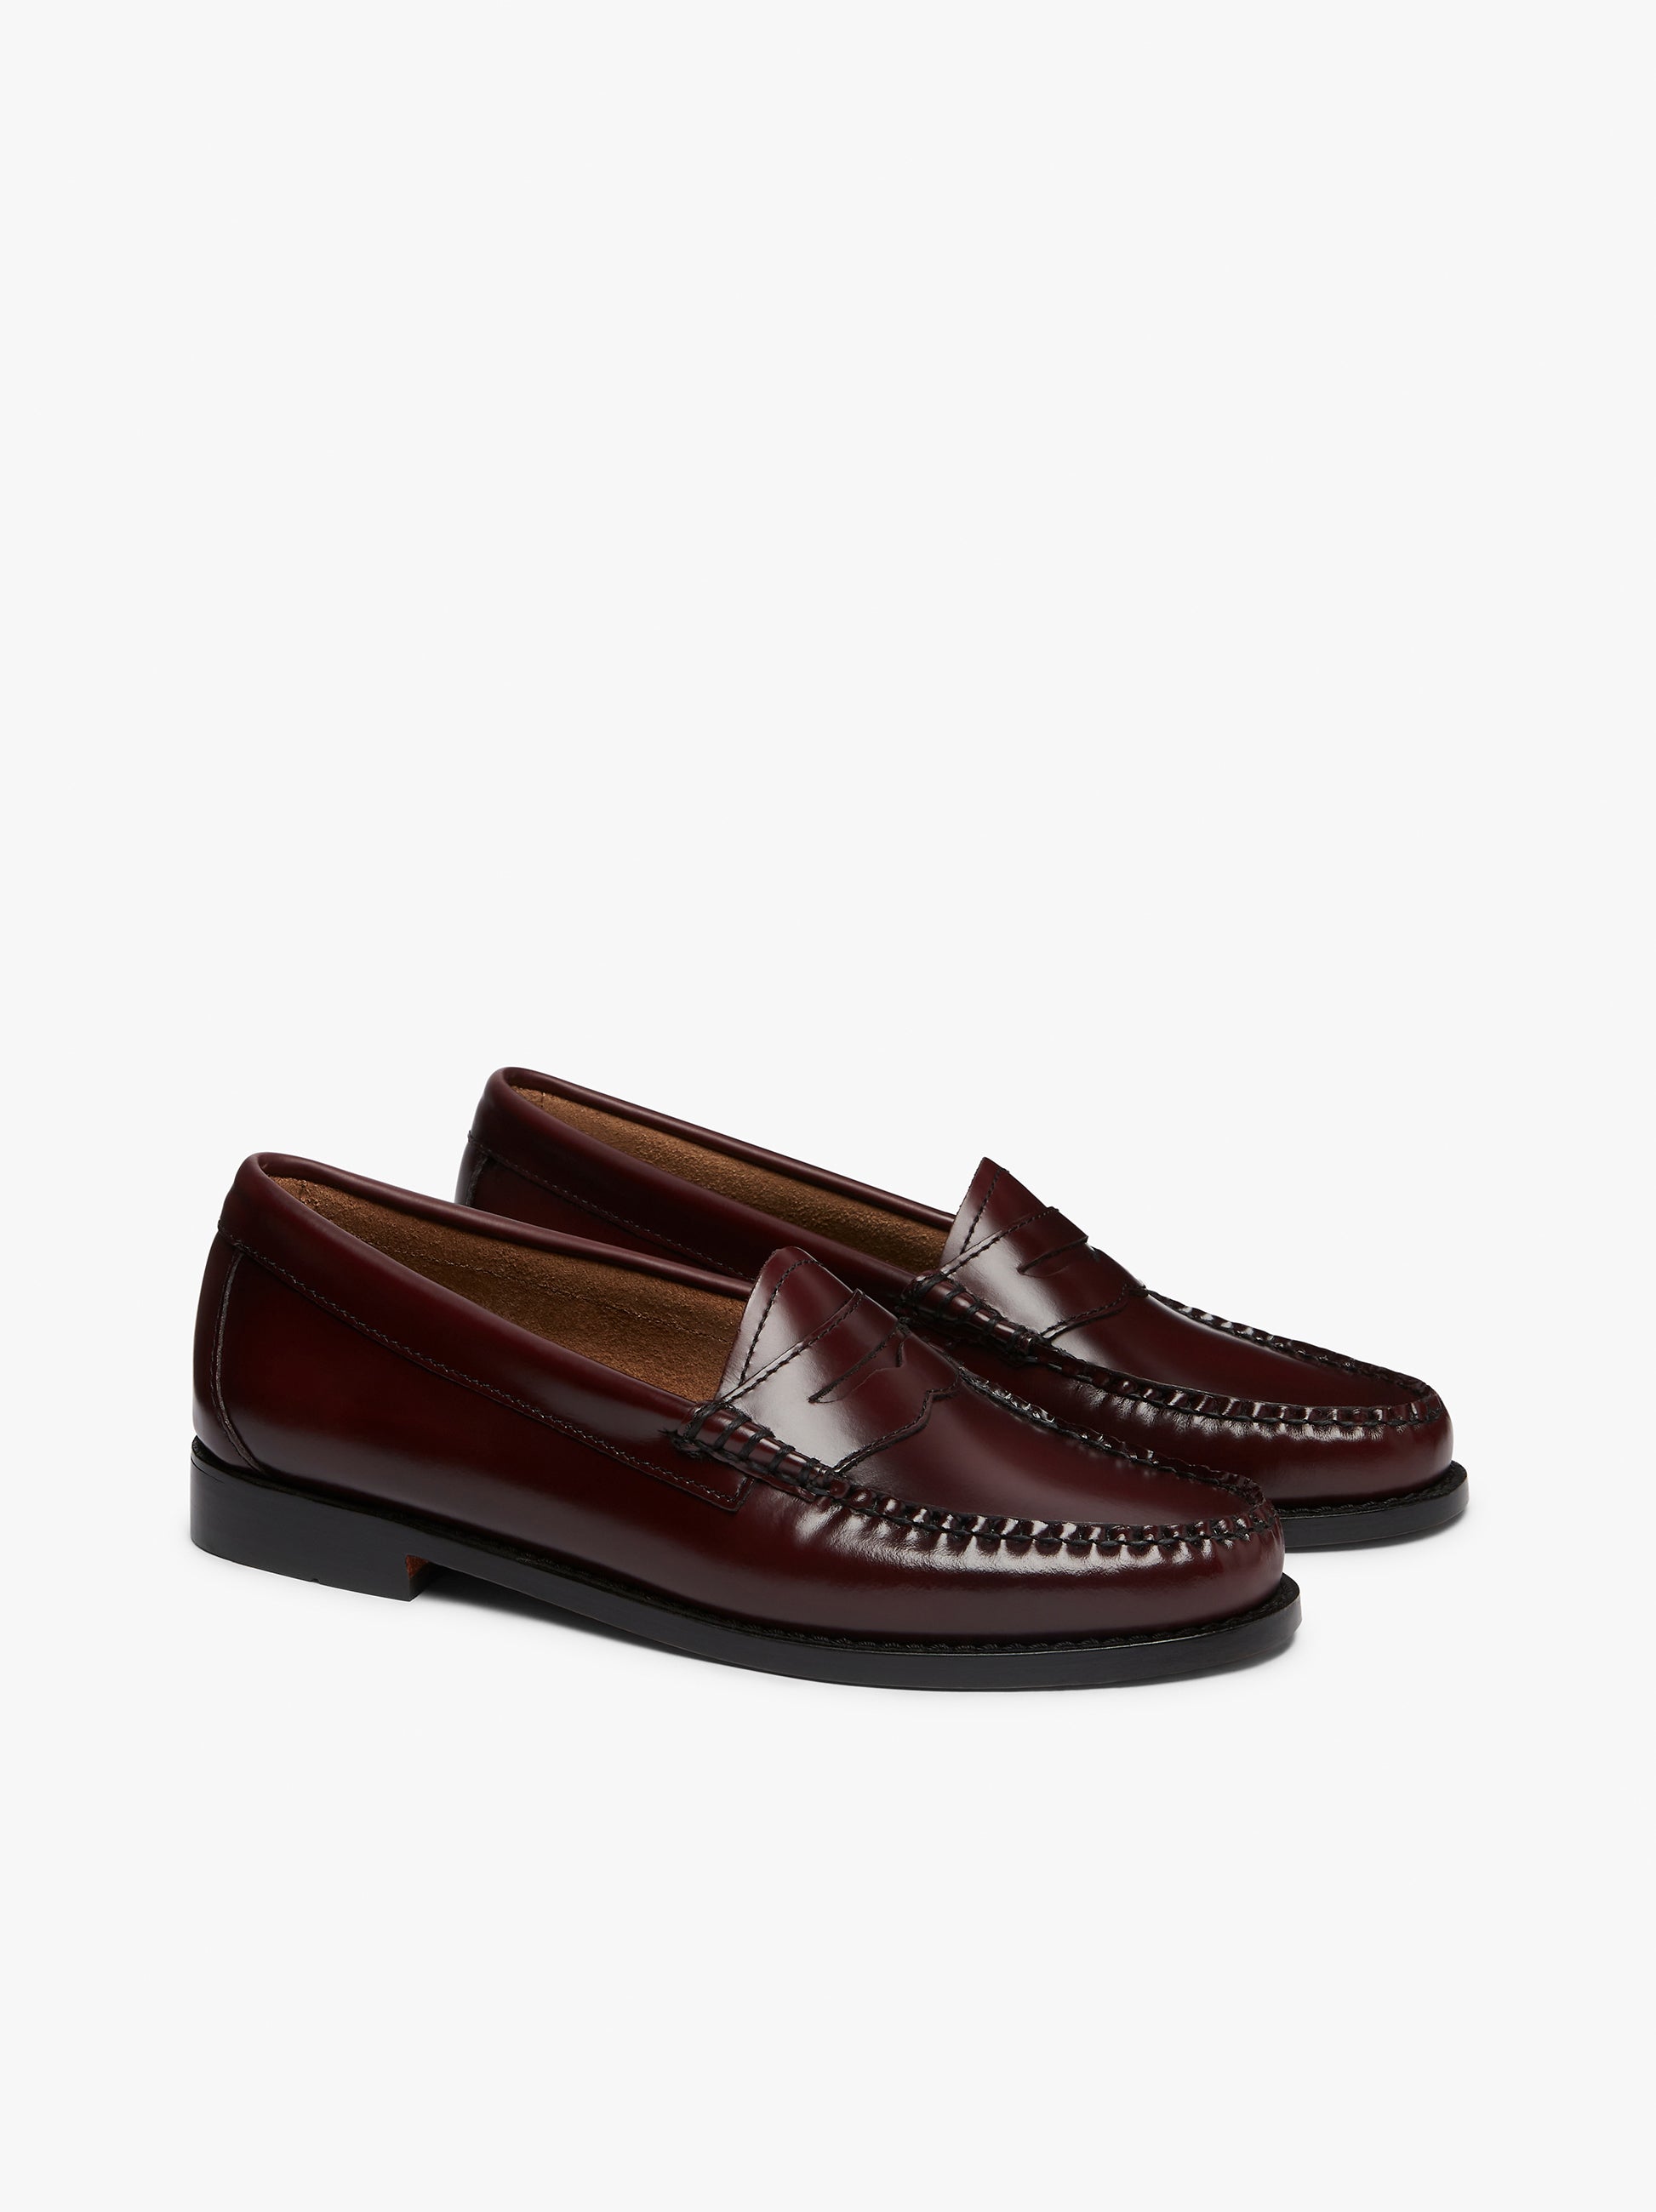 Bass Weejuns Burgundy | Burgundy Leather Loafers – G.H.BASS – G.H.